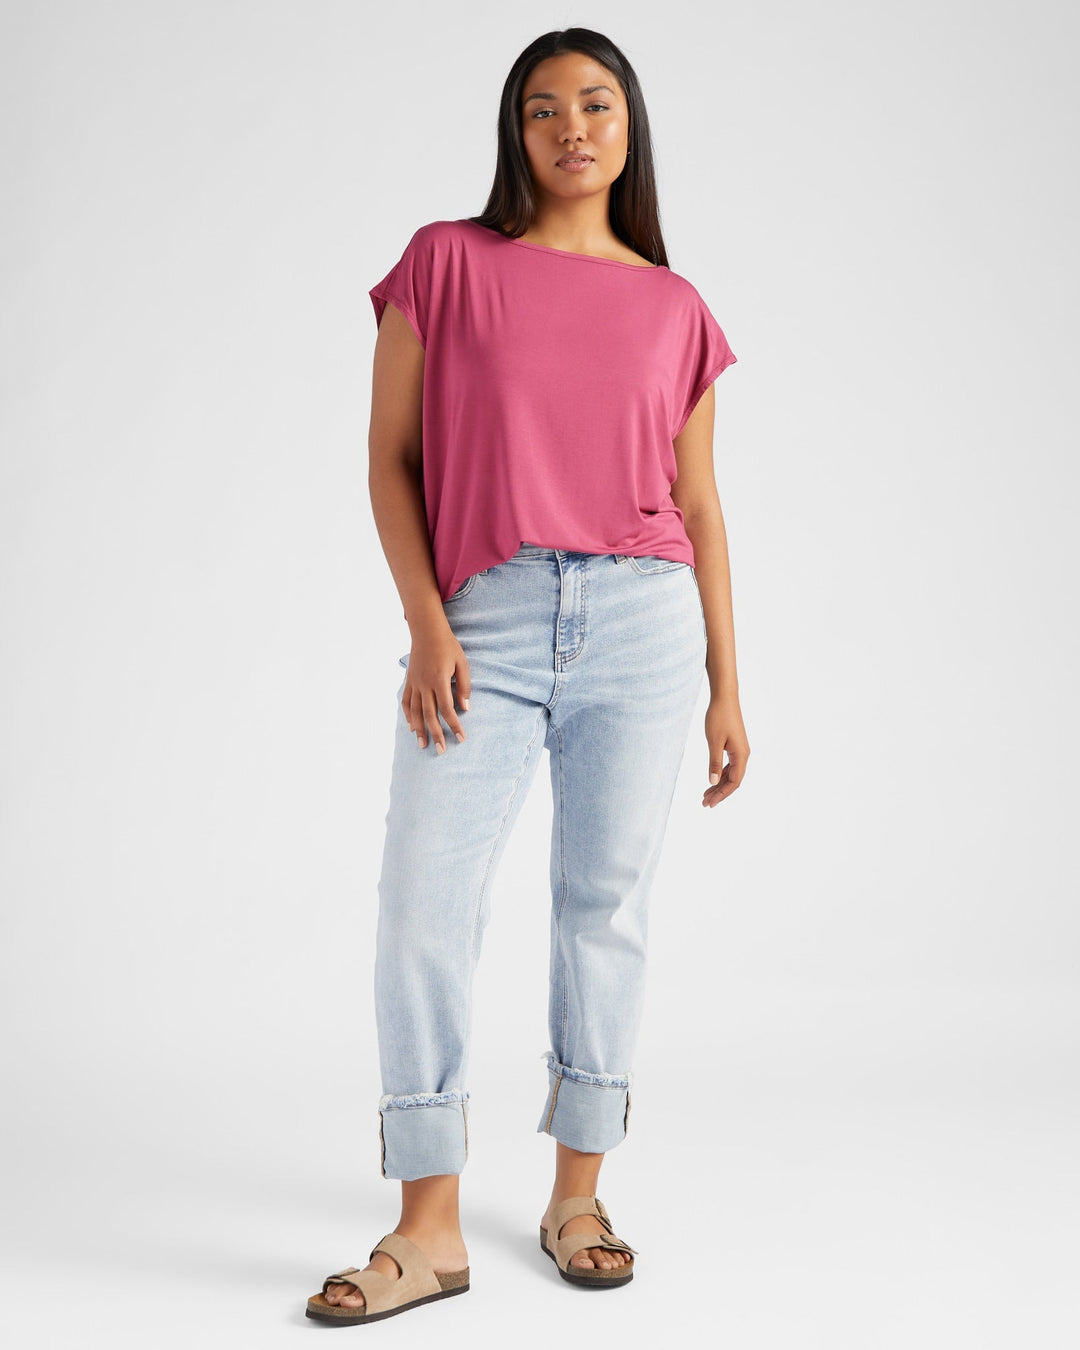 Sangria $|& 78&SUNNY Brentwood Boat Neck Top - SOF Full Front